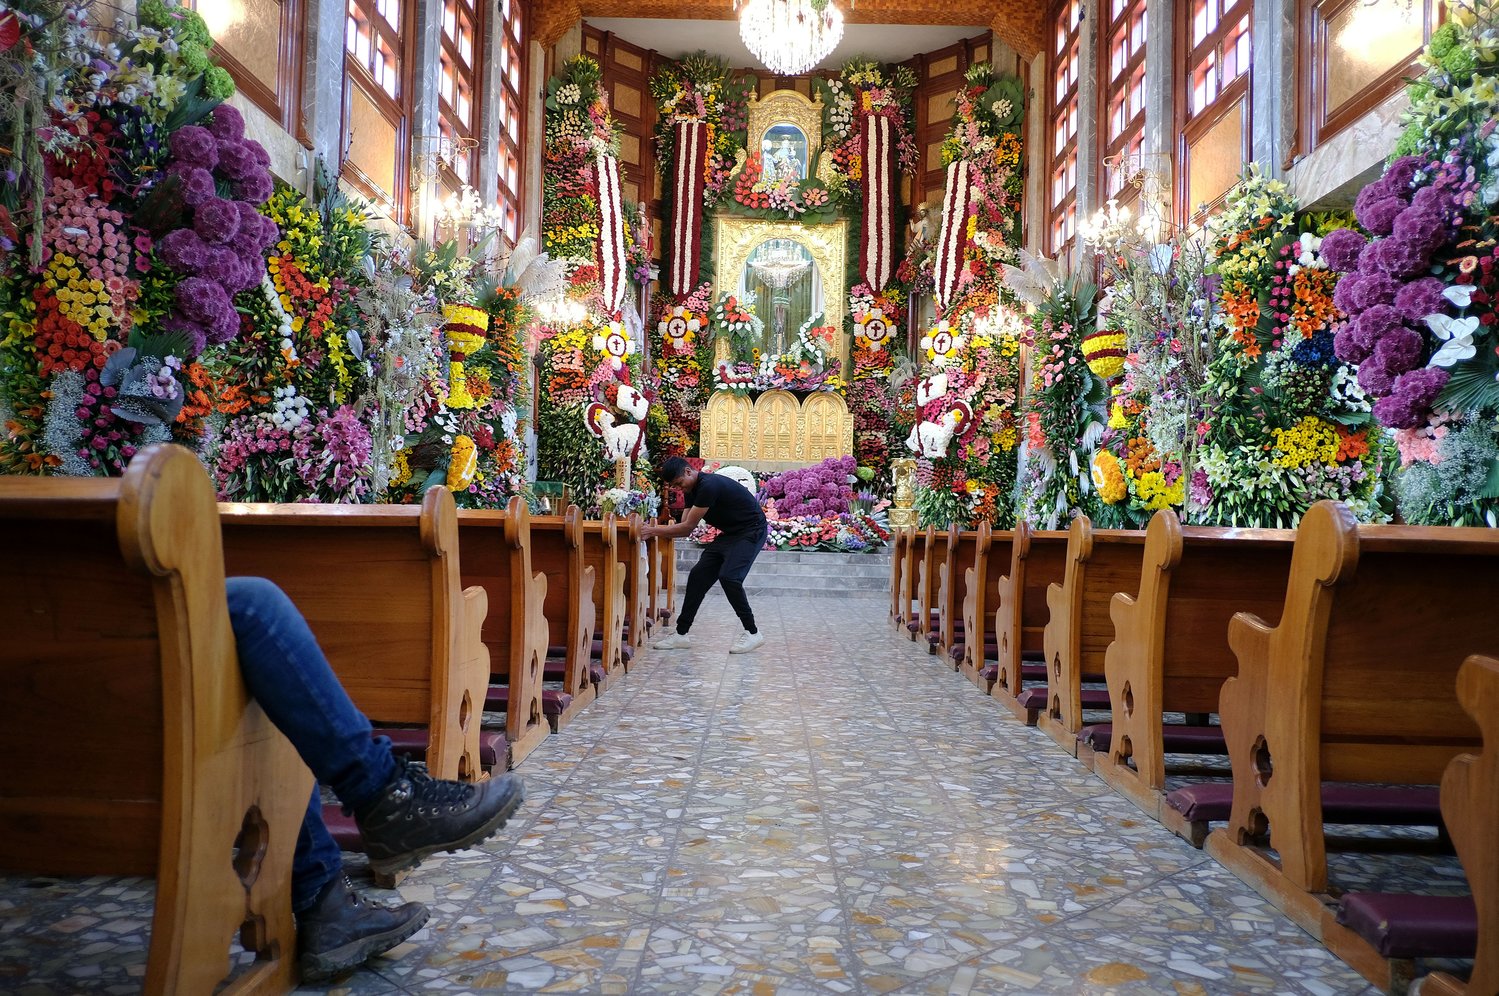 A worker makes final adjustments to a floral arrangement while another worker rests in the church pews inside Santa Ana Ixtlahuatzingo Catholic Church in Tenancingo, Mexico, July 25.